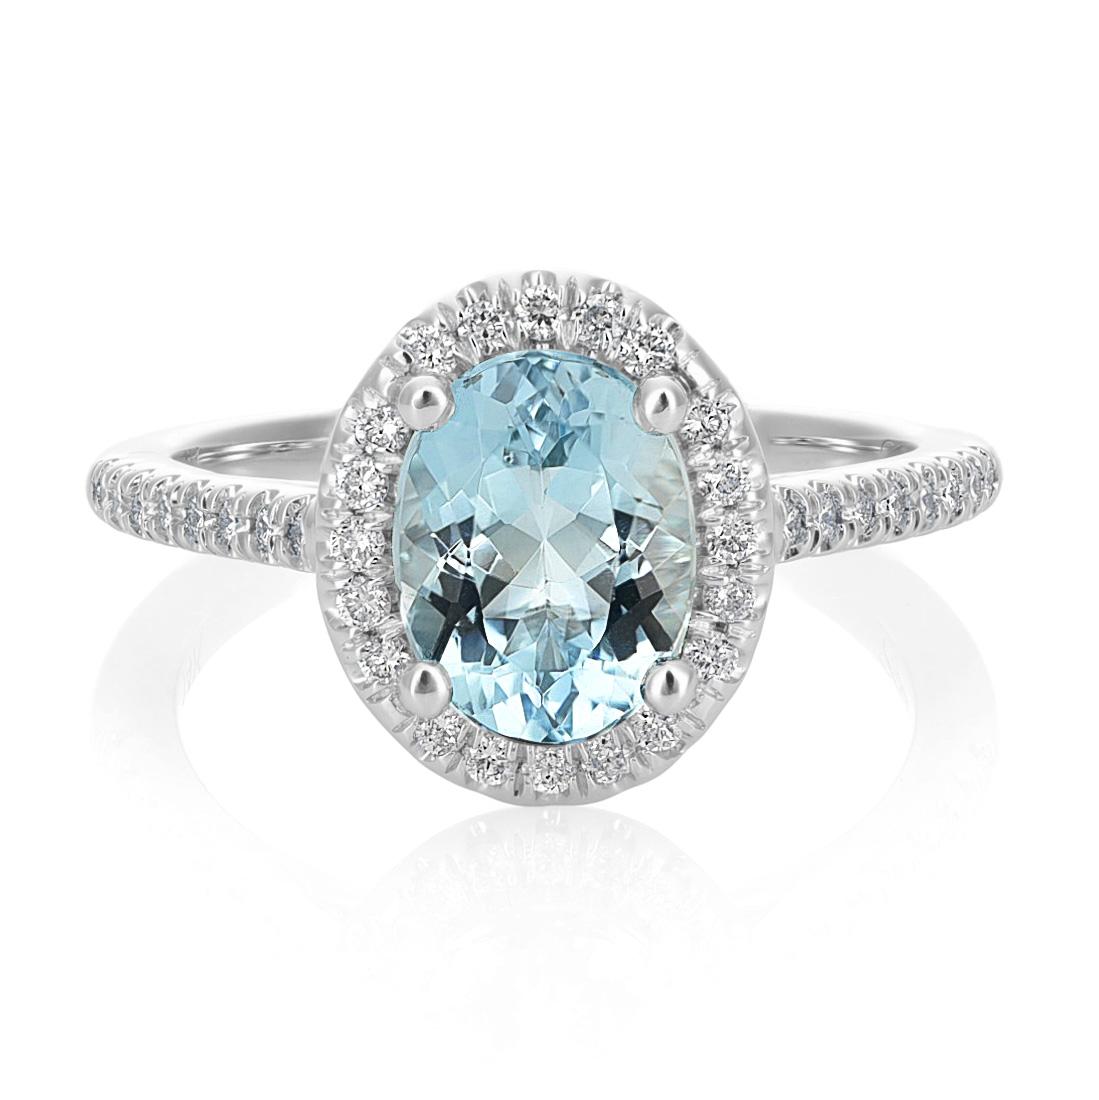 Natural Aquamarine Stone 1.48 Carats set in 14K White Gold Ring with Diamonds In New Condition For Sale In Los Angeles, CA